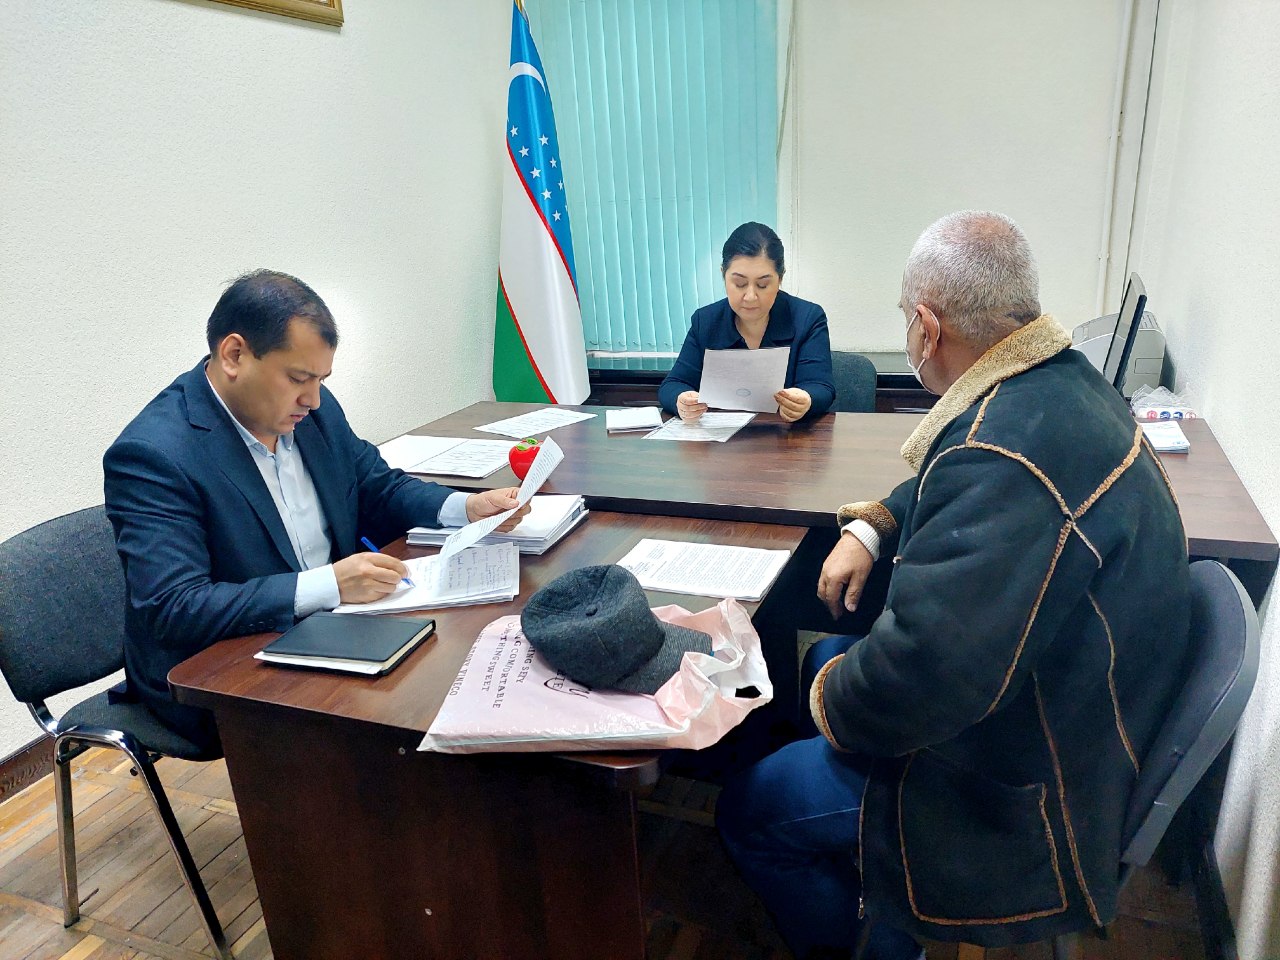 Regular reception of citizens by the Ombudsman took place